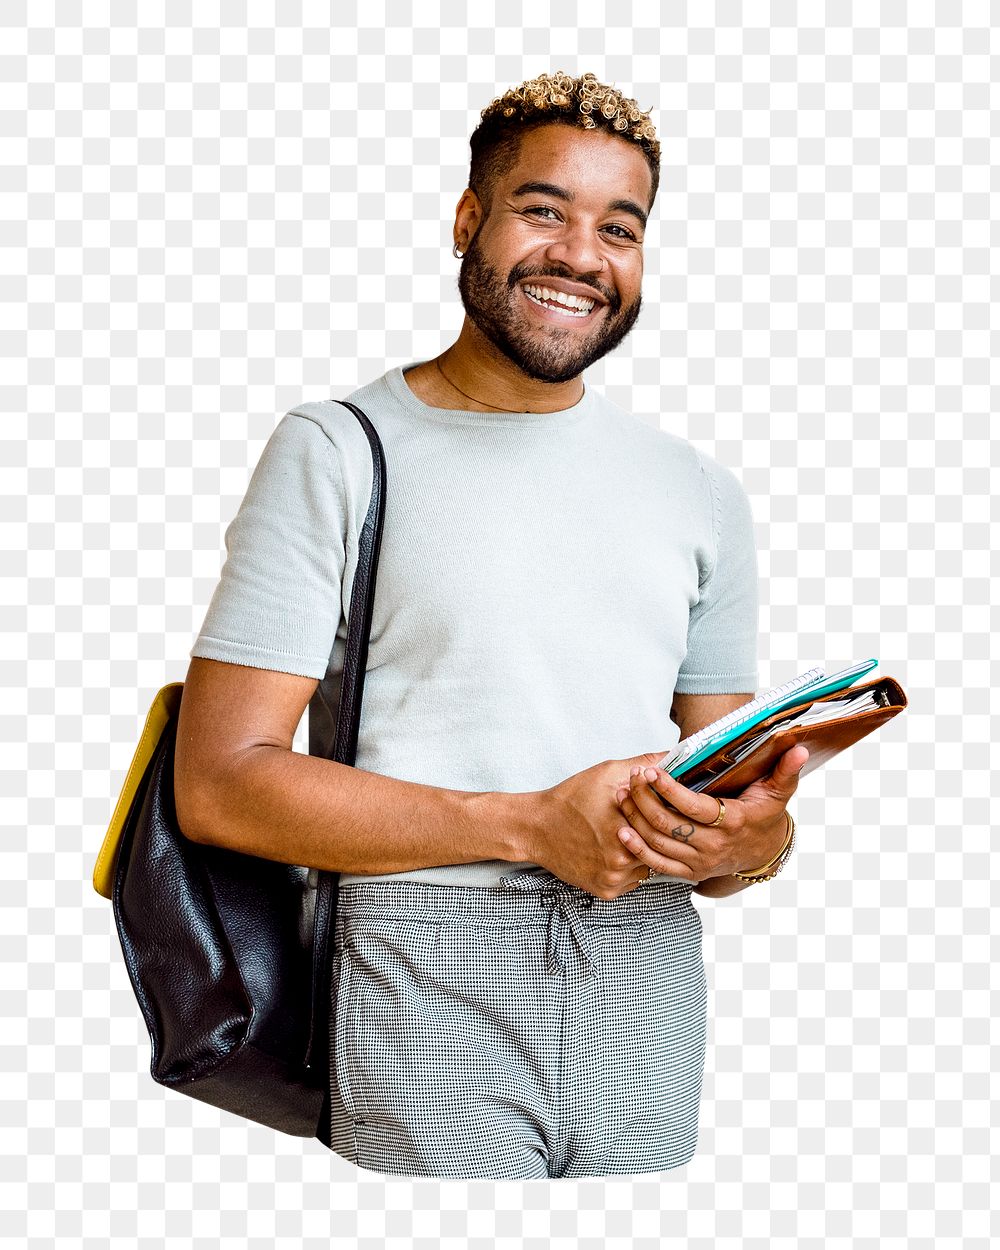 Png happy college student image on transparent background